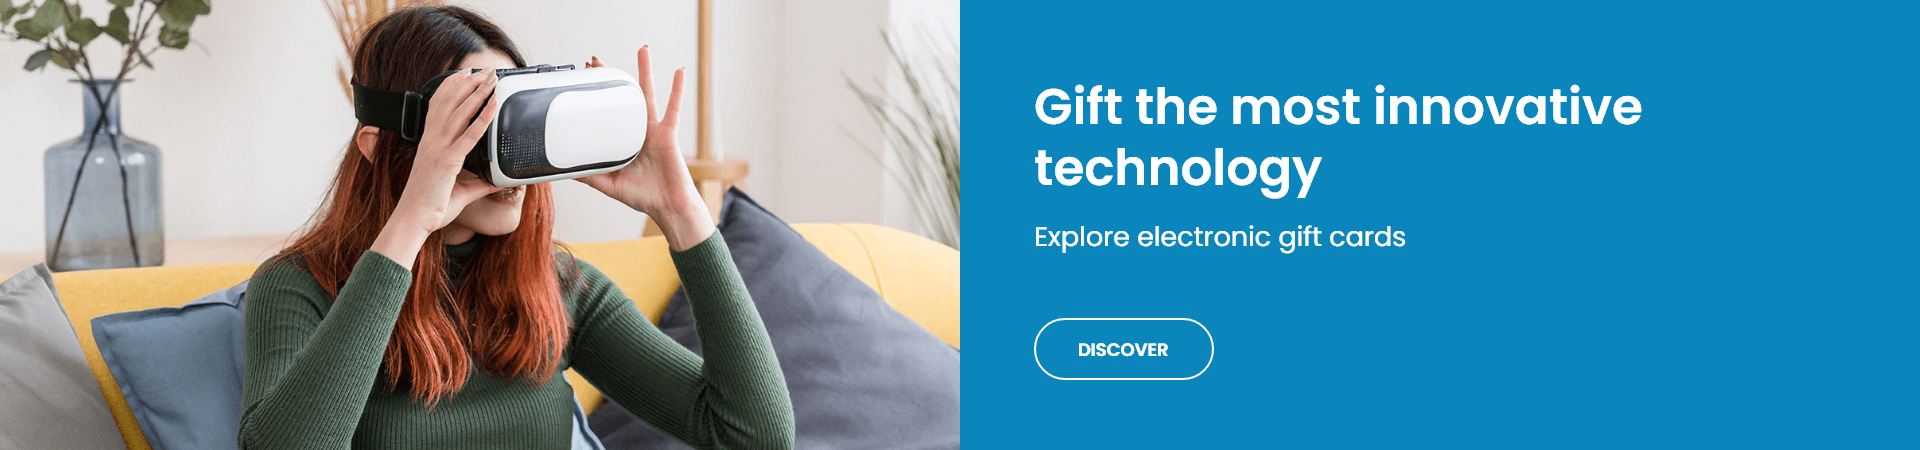 Give digital gift cards for hi-tech purchases